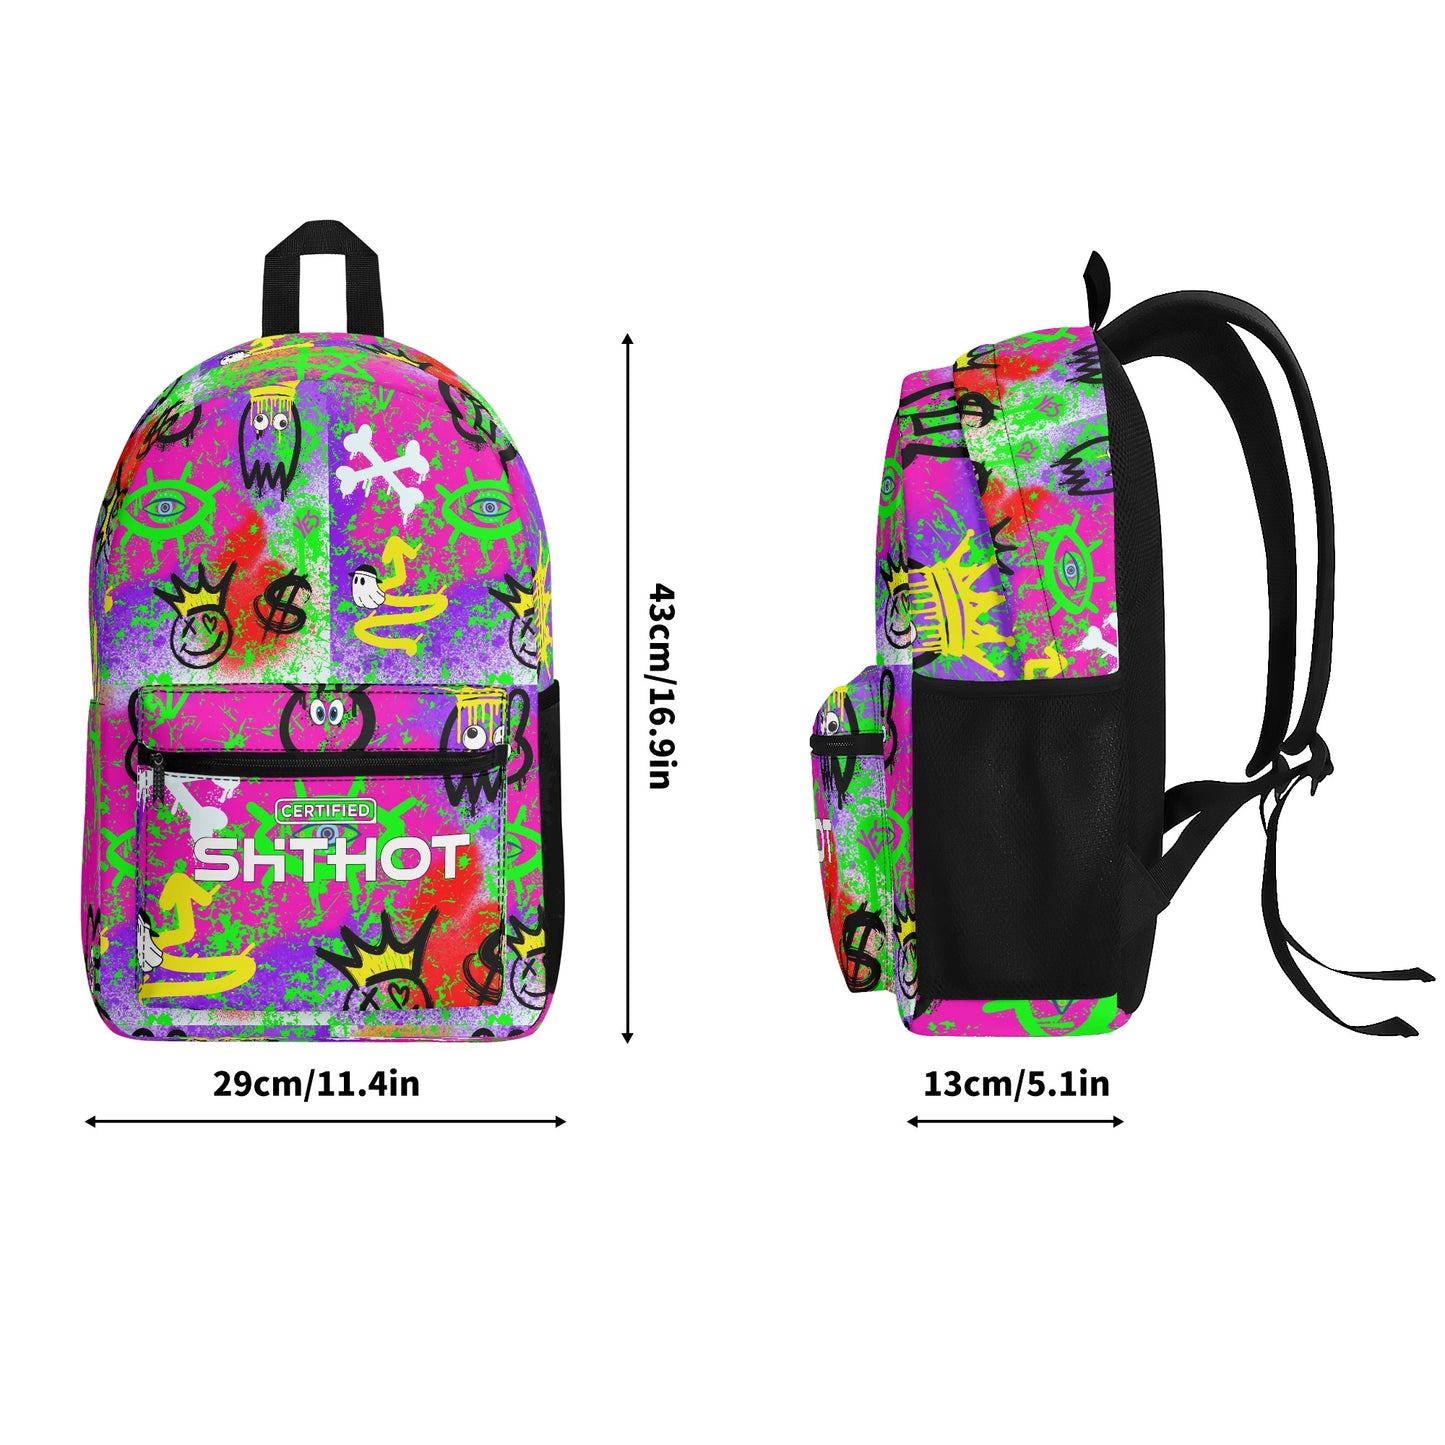 Certified ShitHot Backpack - The Notorious